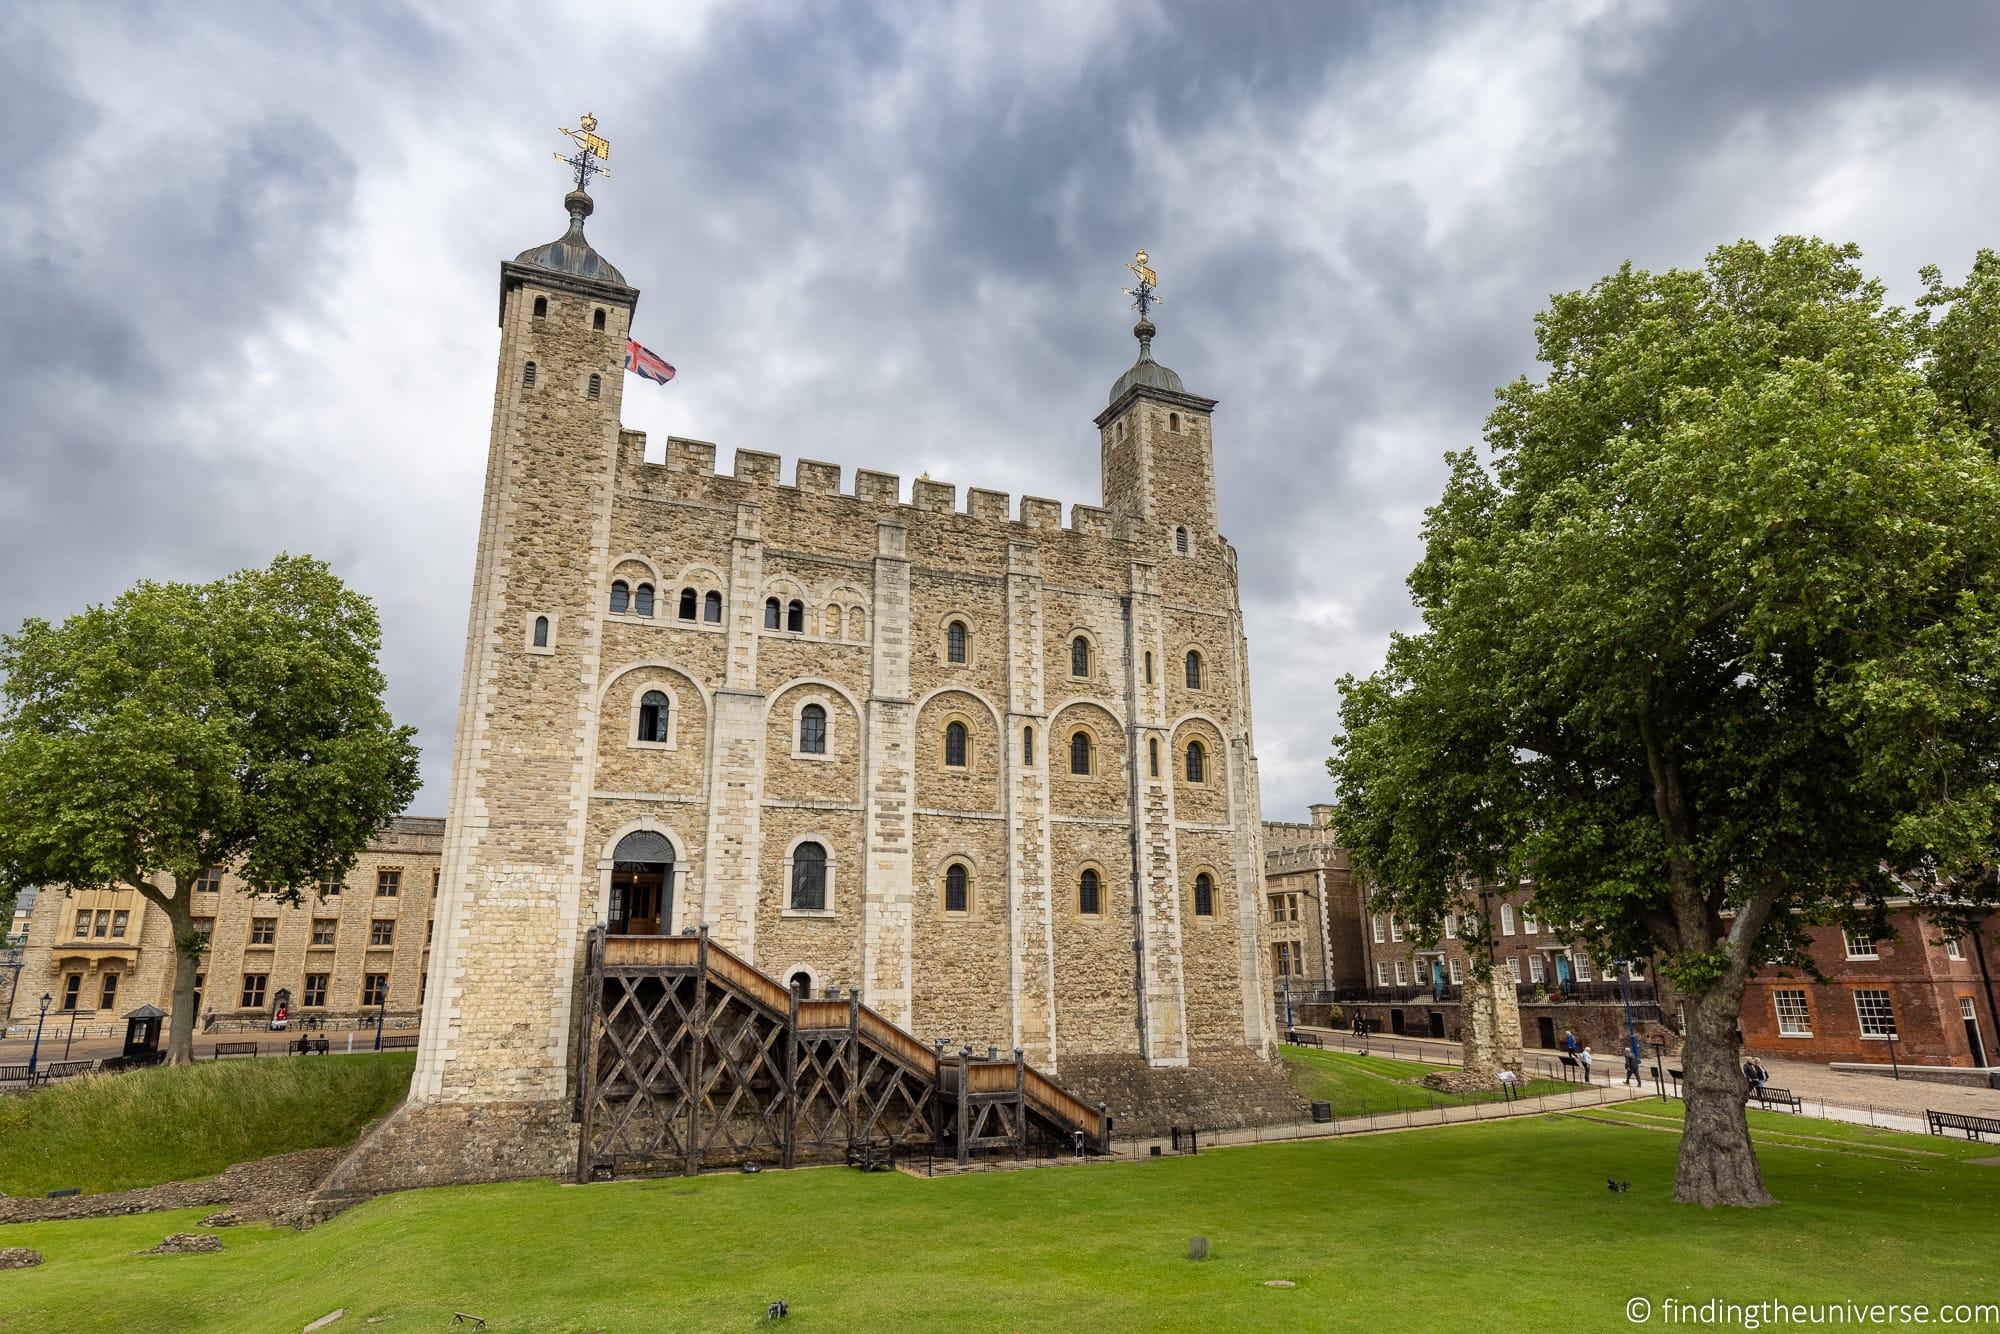 White Tower Tower of London